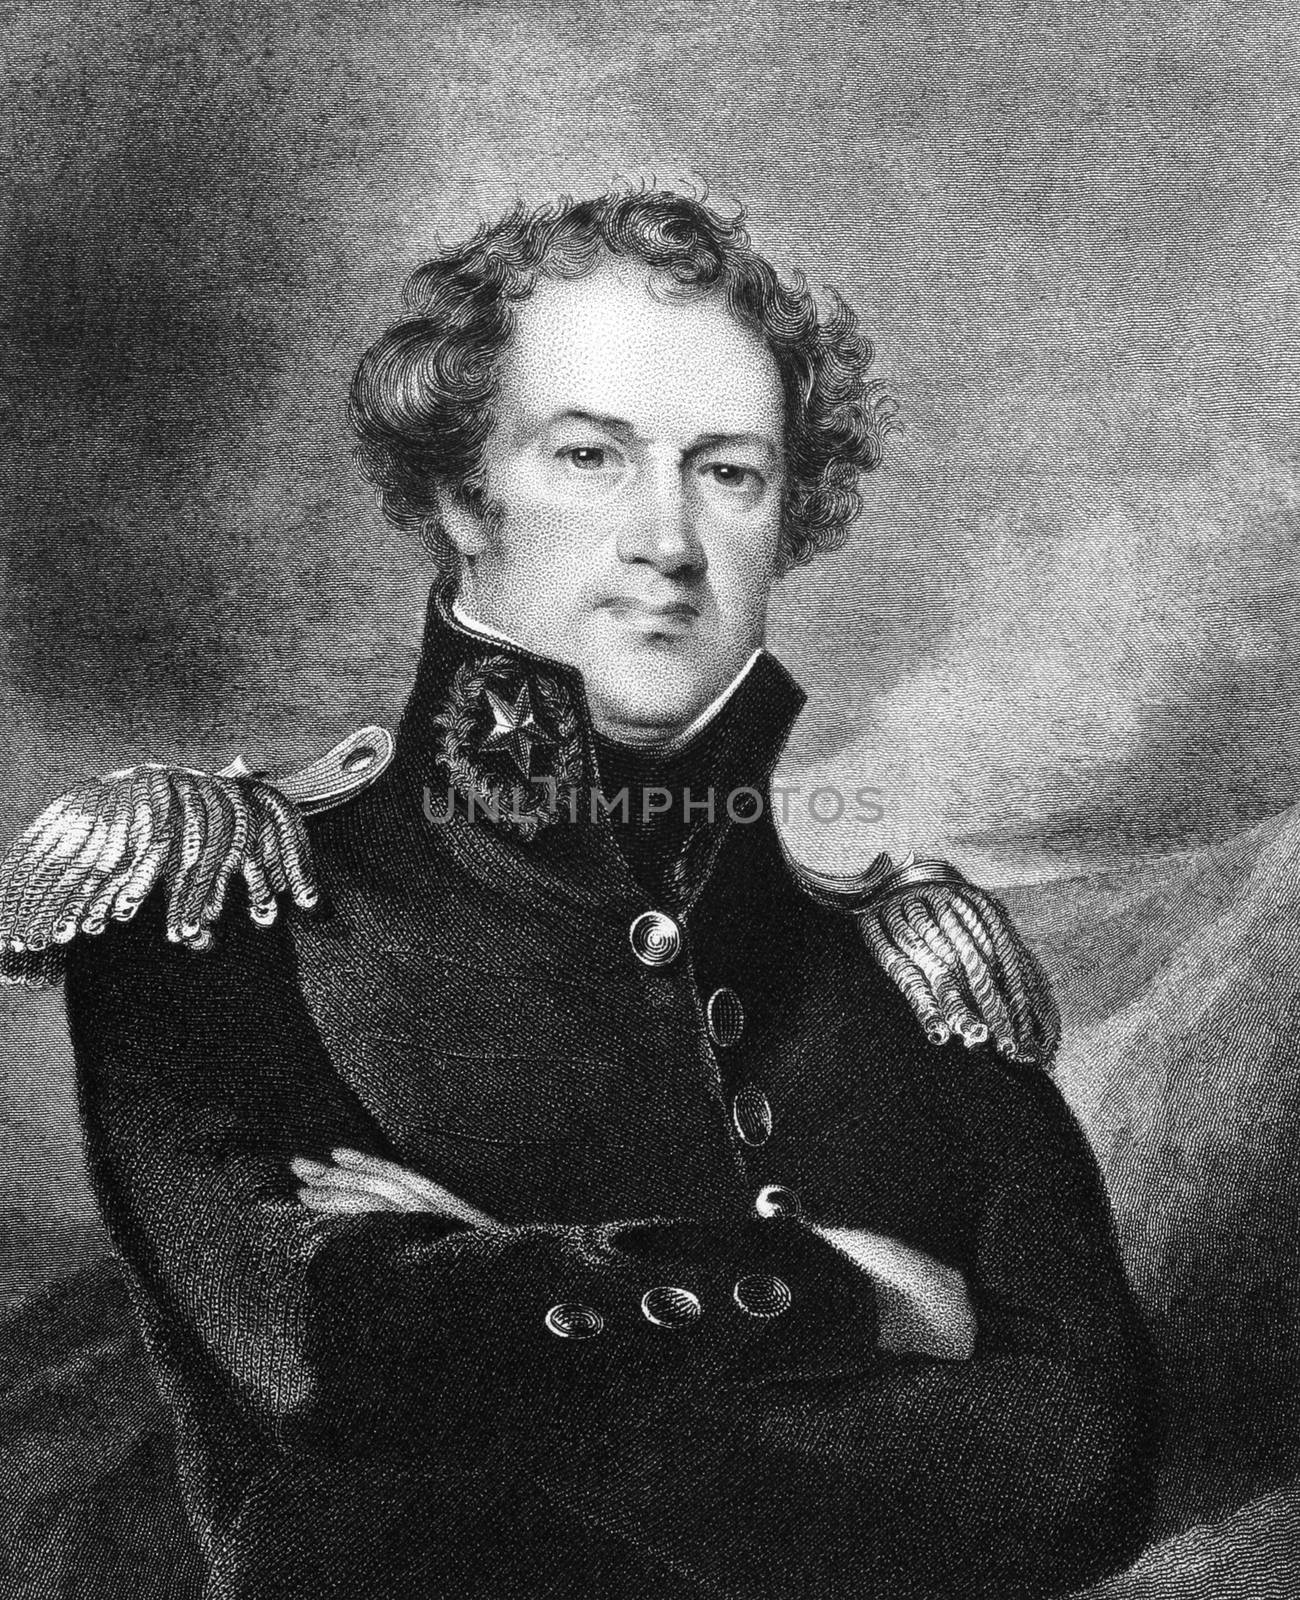 Alexander Macomb (1782-1841) on engraving from 1834. Commanding General of the United States Army during 1828-1841. Engraved by J.B Longacre and published in ''National Portrait Gallery of Distinguished Americans'',USA,1834.